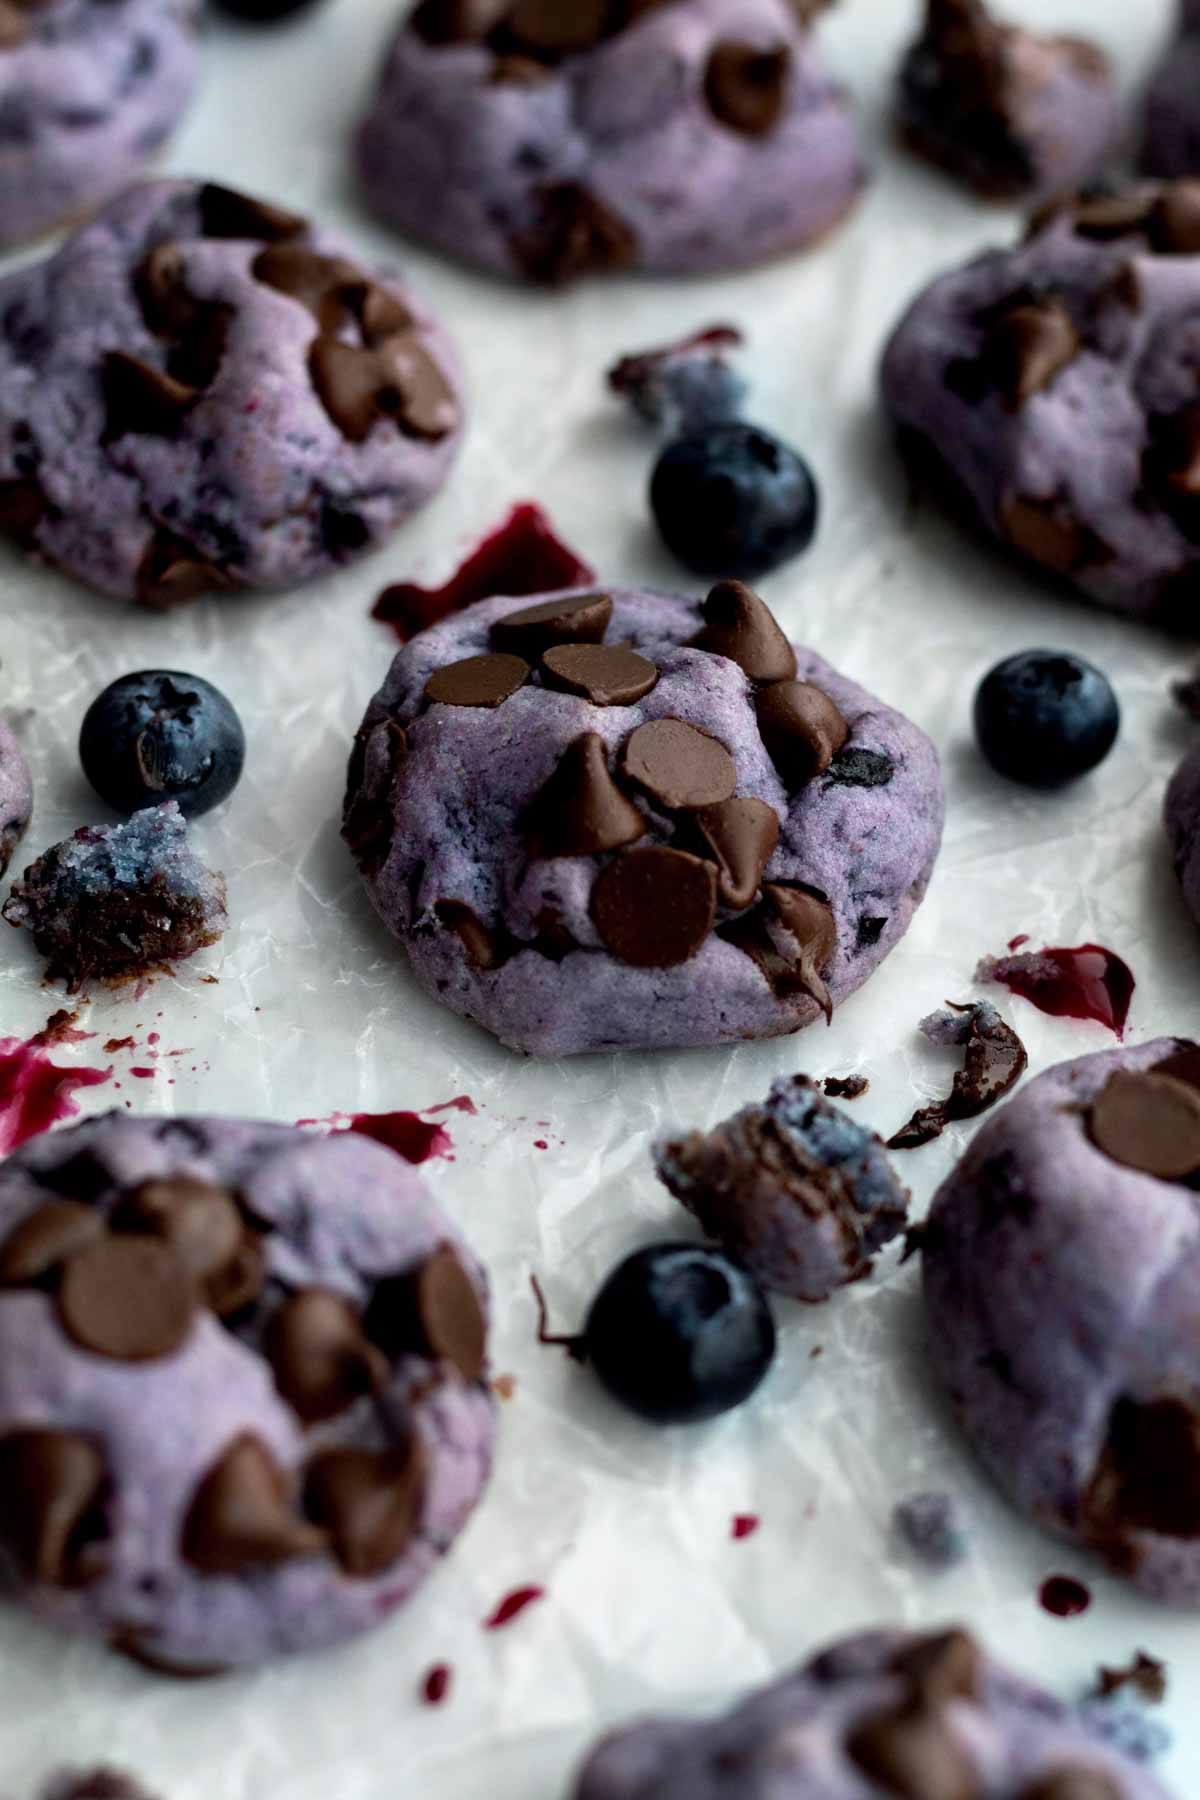 Gluten free Blueberry Cookies with chocolate chips on parchment paper.